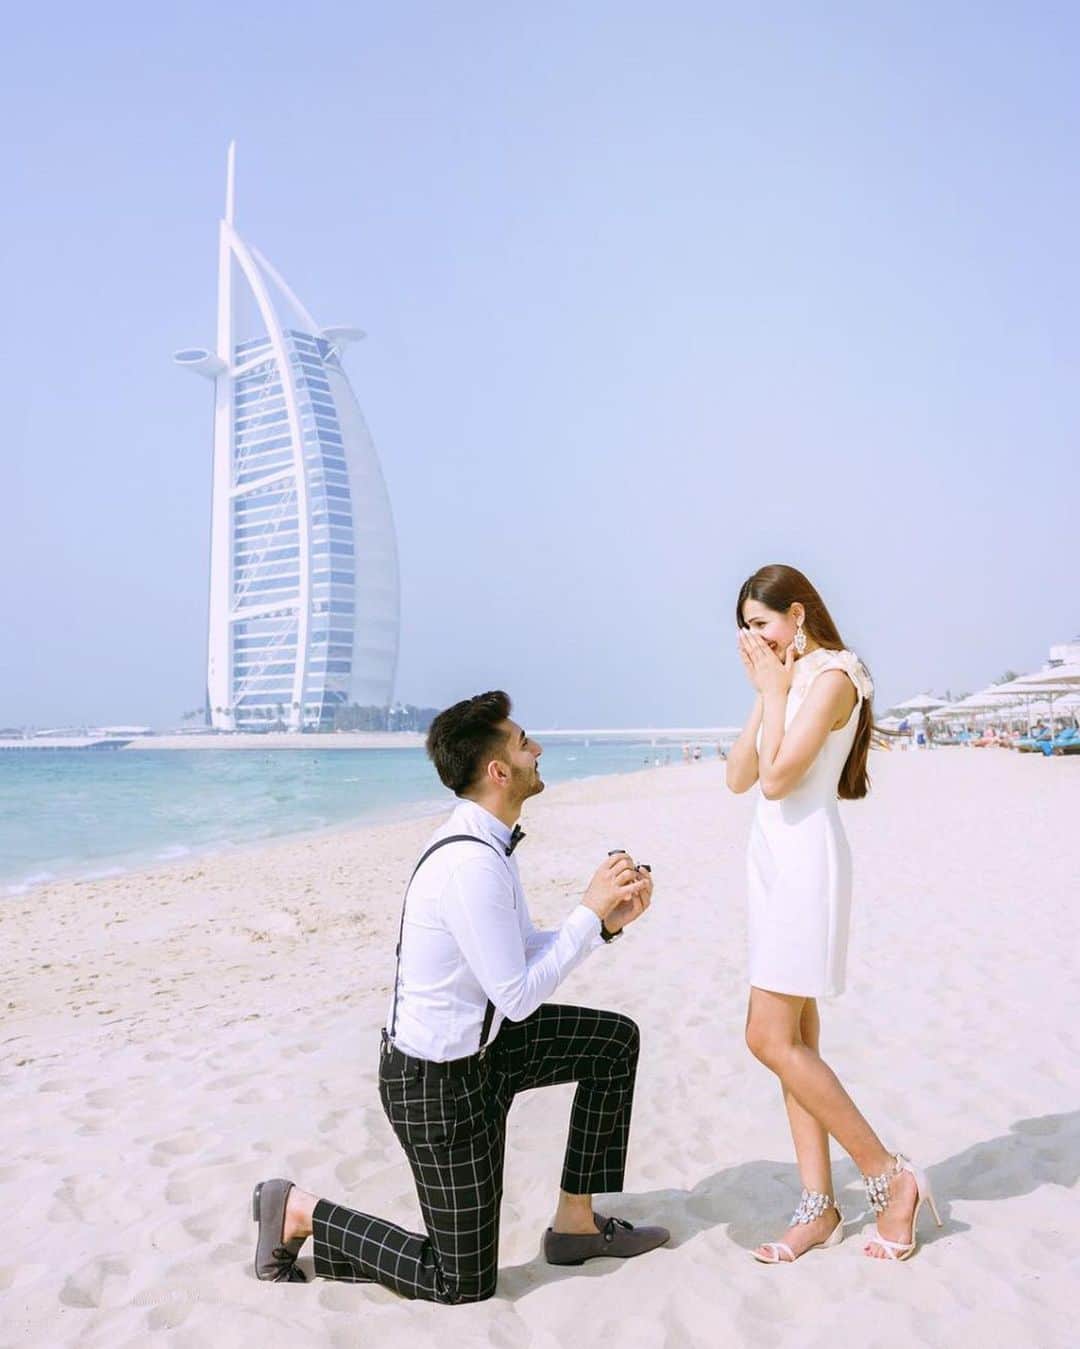 Wedding ?のインスタグラム：「First the proposal ❤️ and then the dream came true! What a lovely wedding from our dear follower @salina1safal . Thanks for sharing these lovely photos with us! ❤️ we wish you both lots of happiness ❤️」